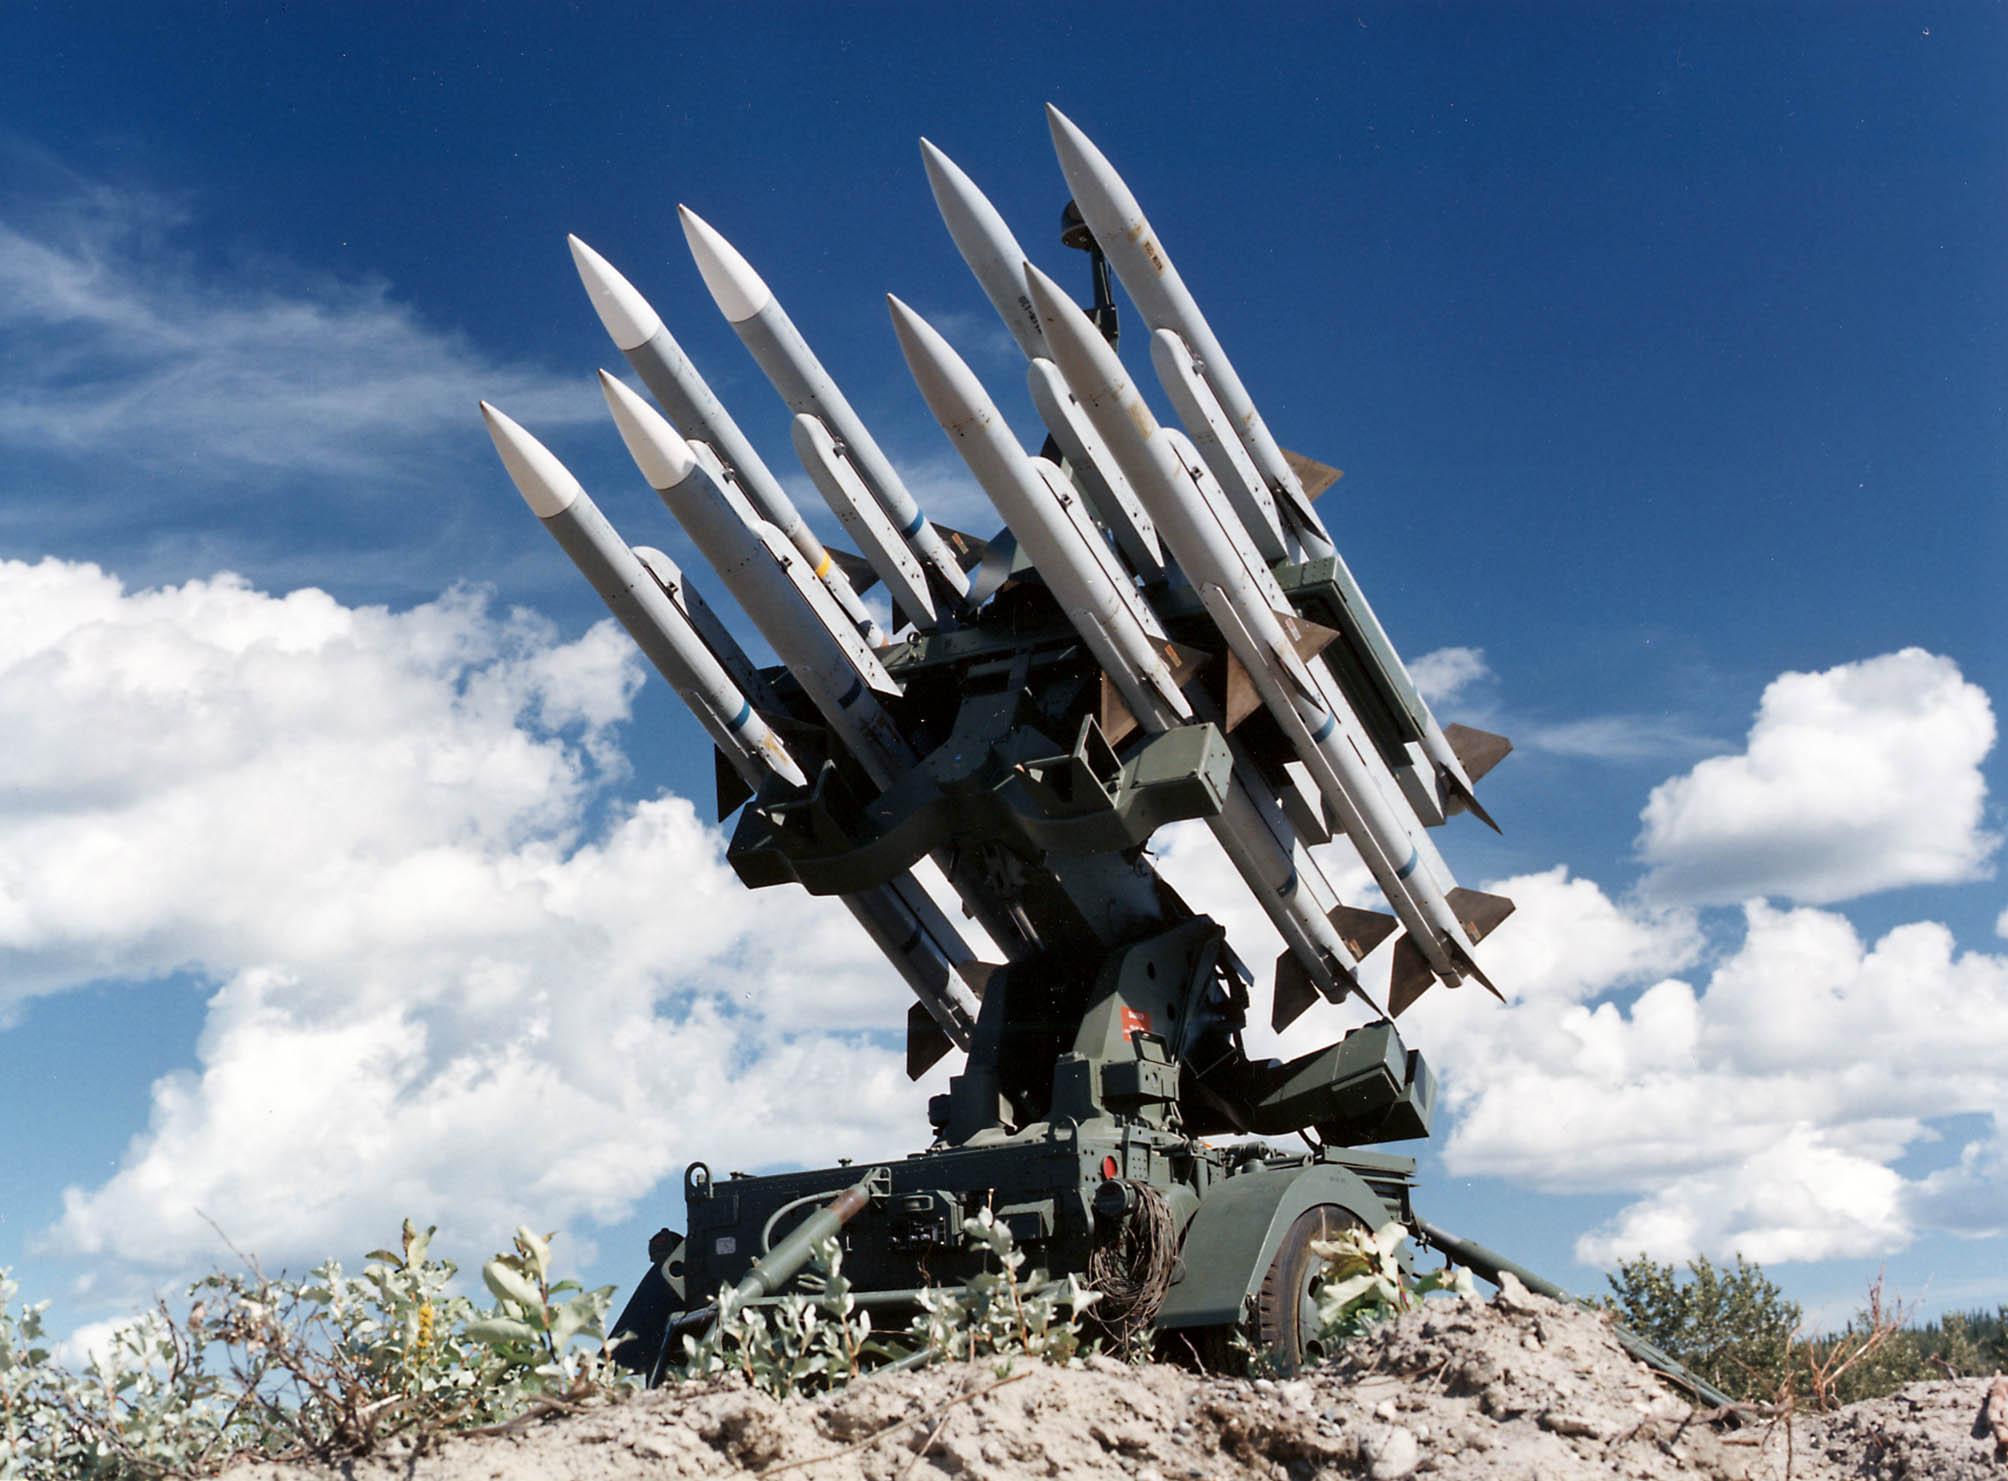 aircraft-planes_other_anti-aircraft-missile-sam_79933.jpg